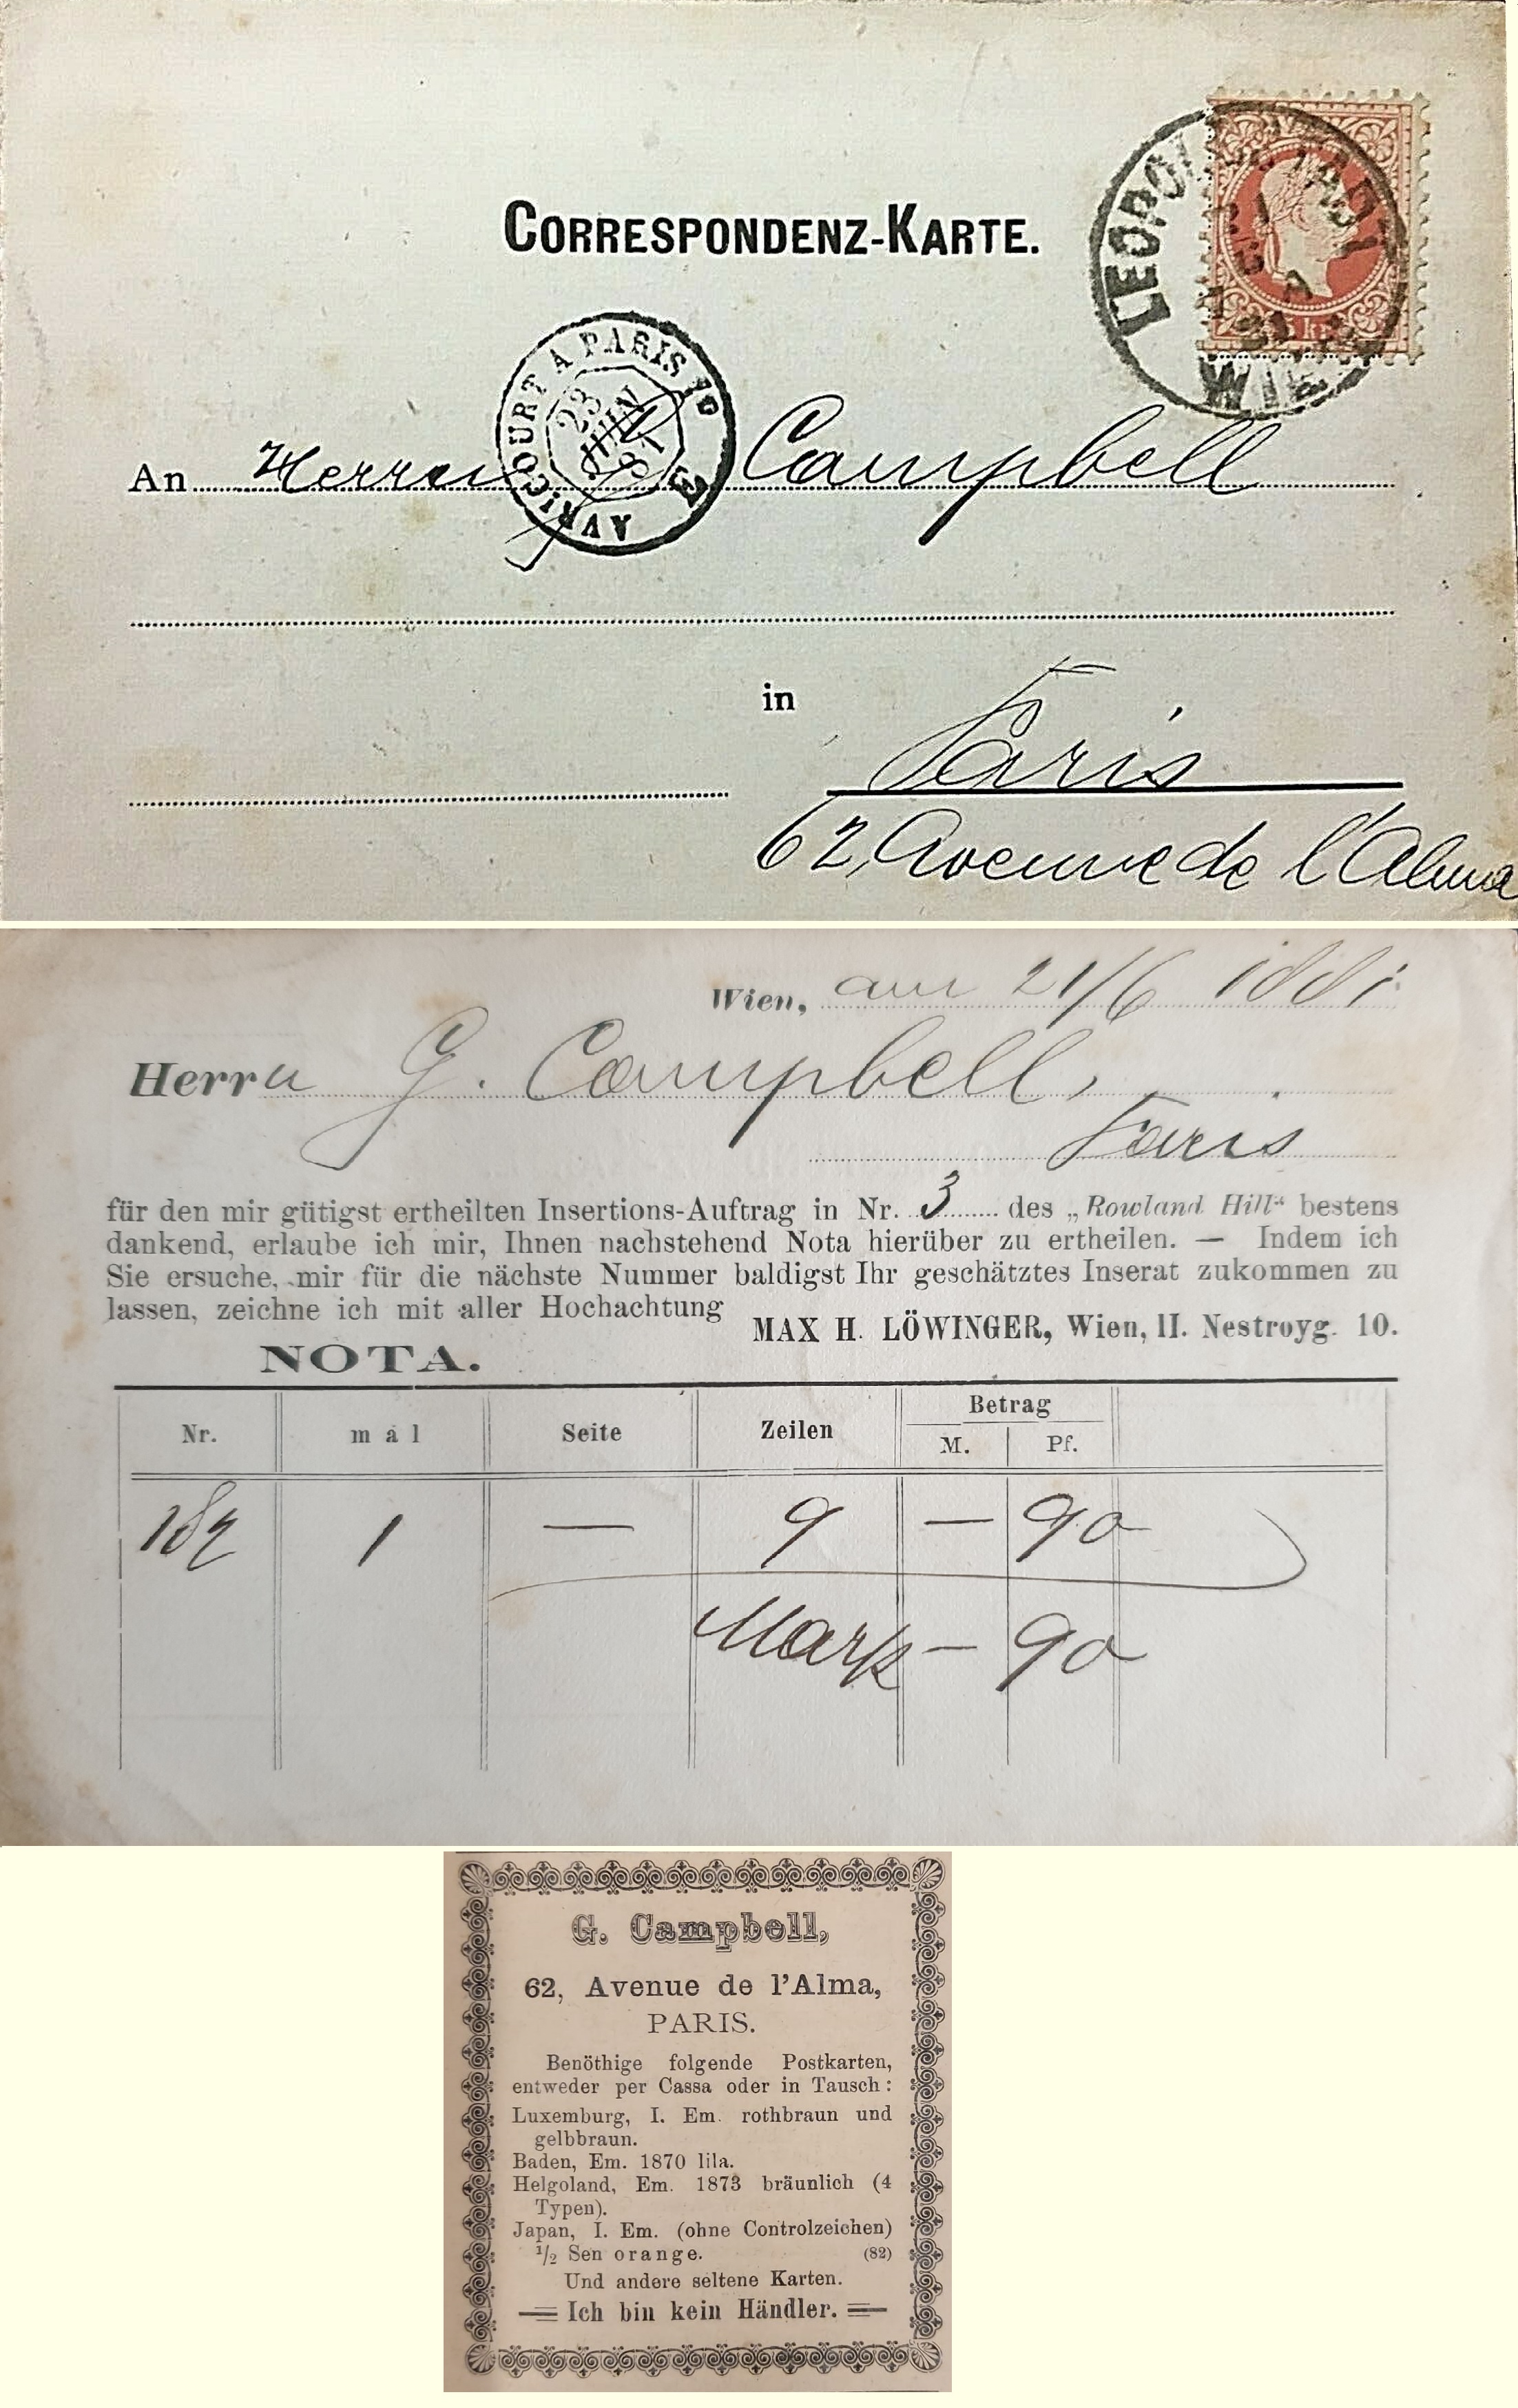 Austrian Correspondence Card sent to Paris in June 1881, concerning an advertisement in a philatelic magazine.